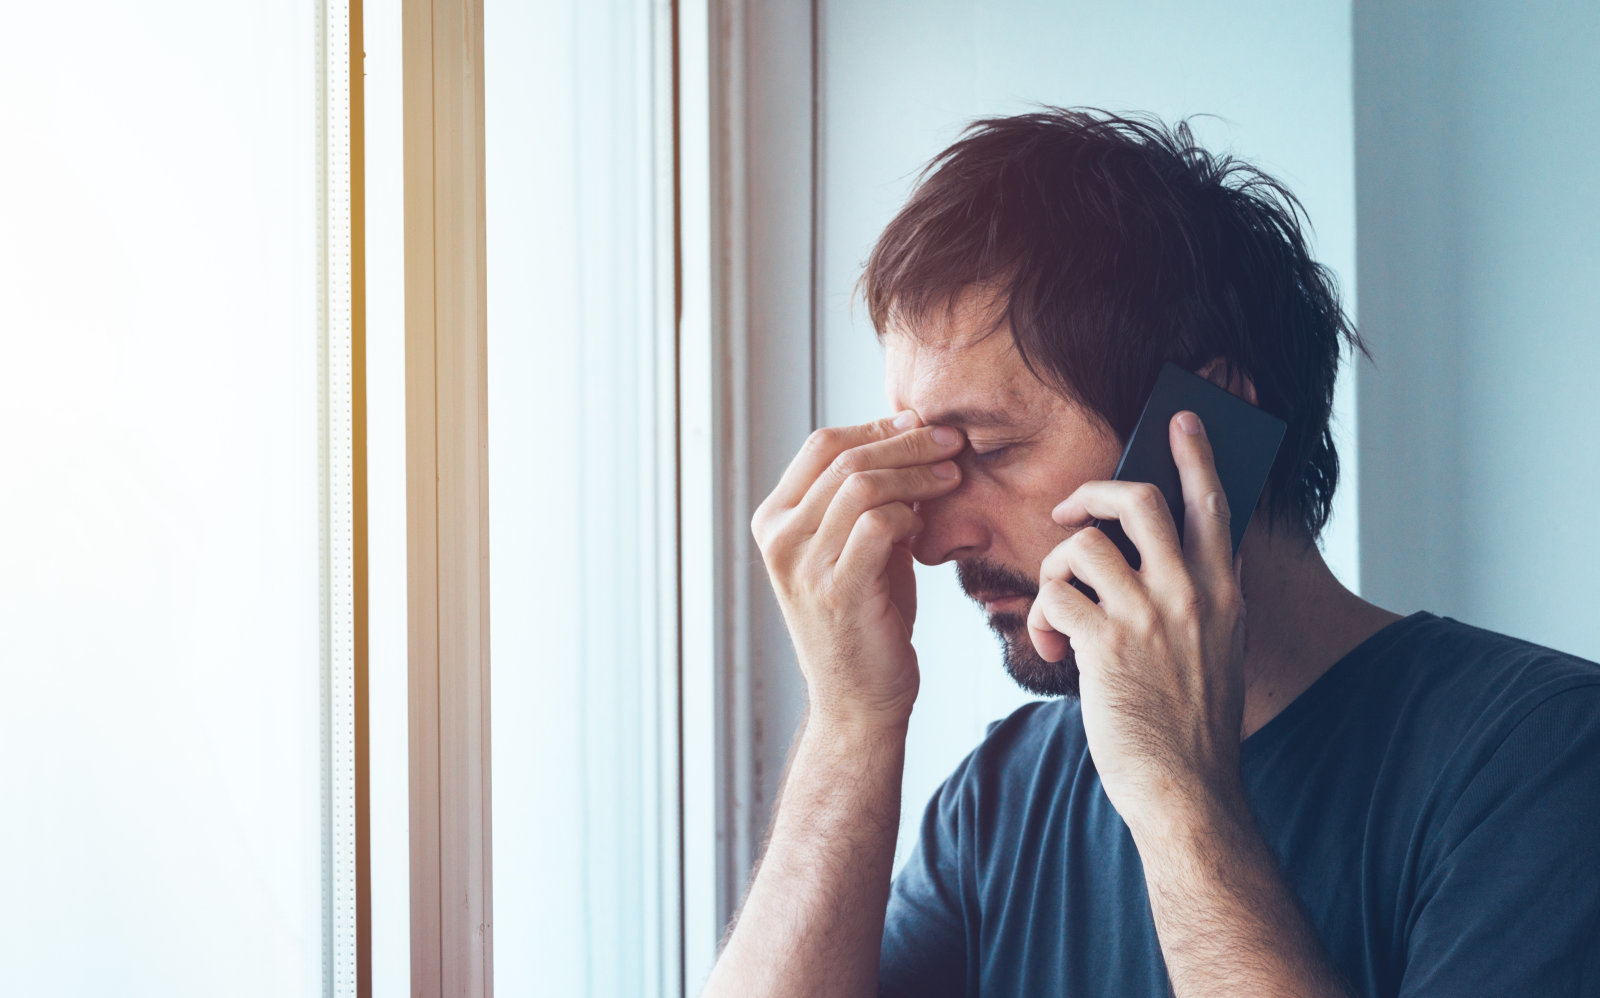 Unpleasant phone call, worried anxious man talking with someone on mobile phone